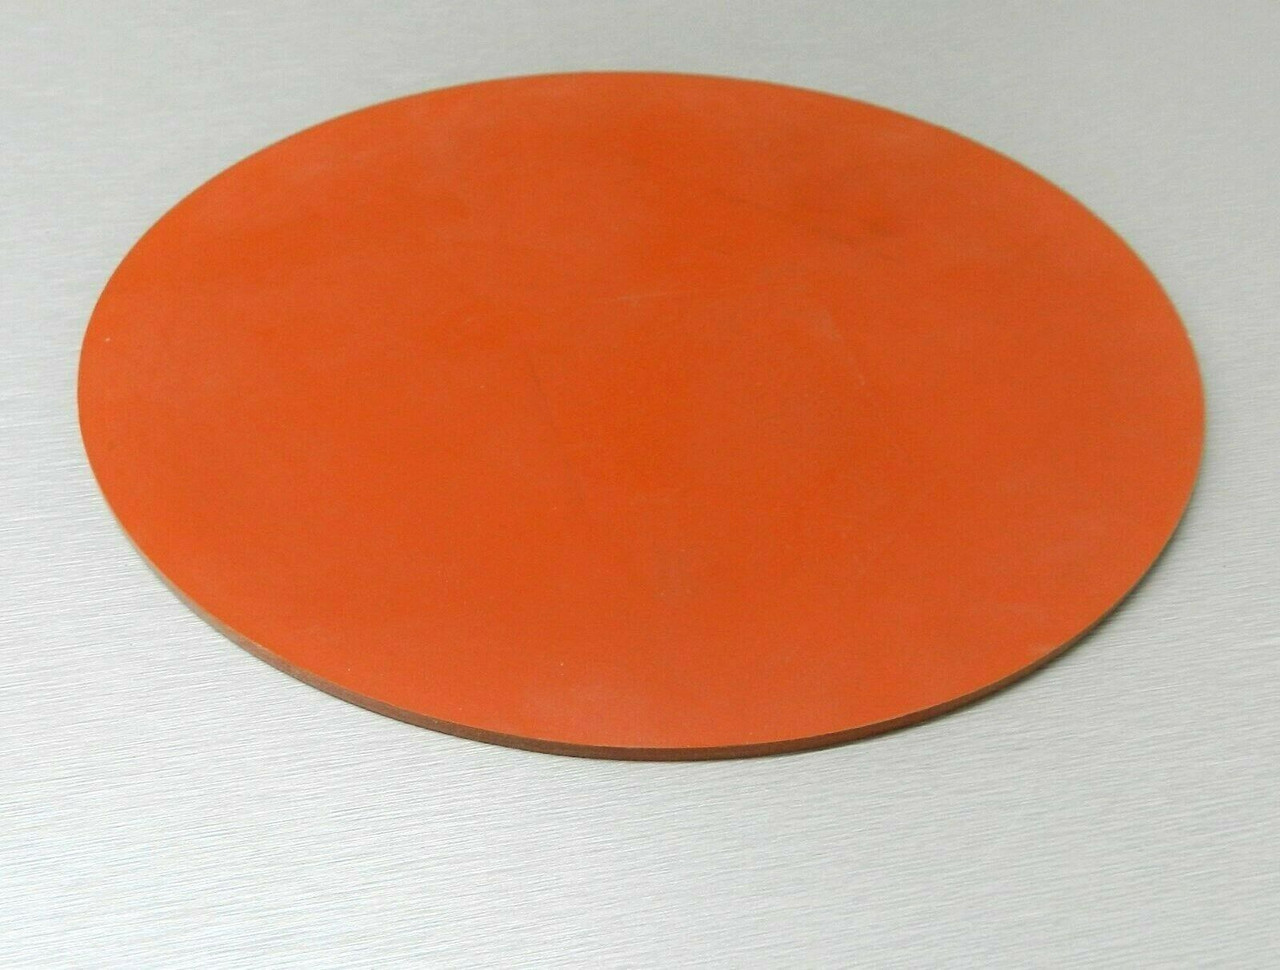 Silicone Rubber Pad 4" Round Disc Heat Absorbent Gasket Jewelry Material Kitchen